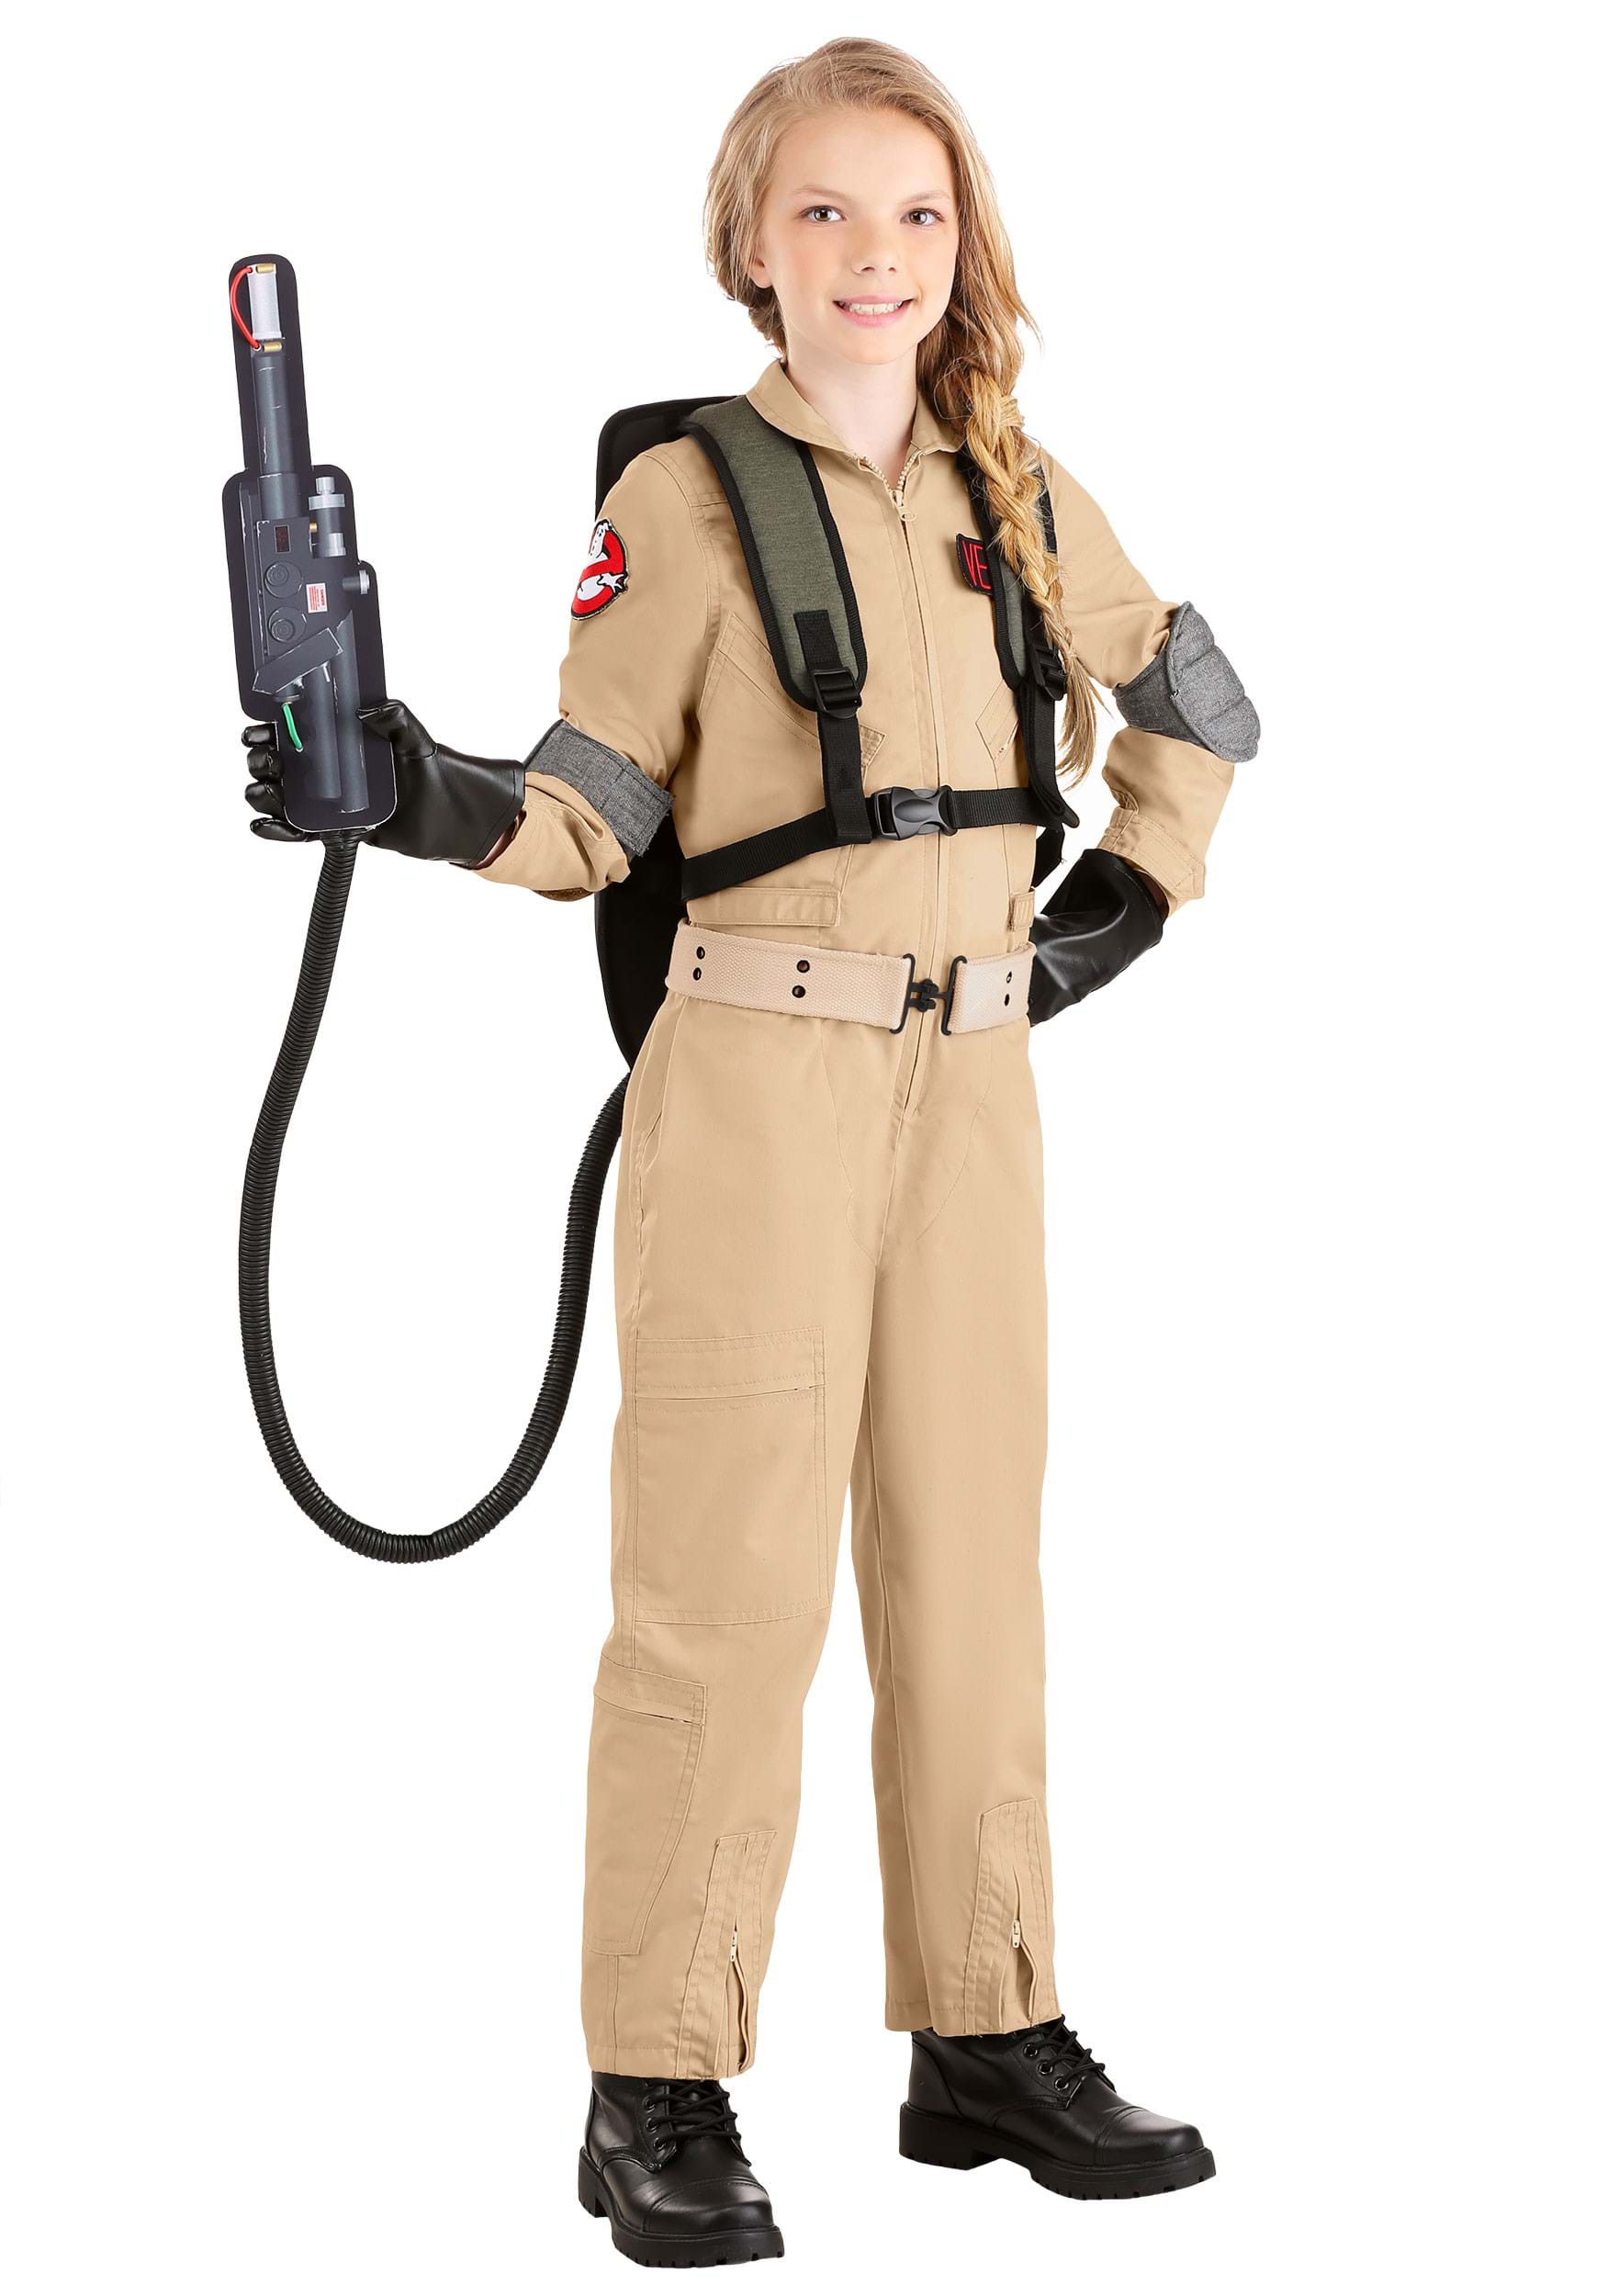 Photos - Fancy Dress Ghostbusters FUN Costumes  Cosplay Costume for Boys Black/Red/Beige 